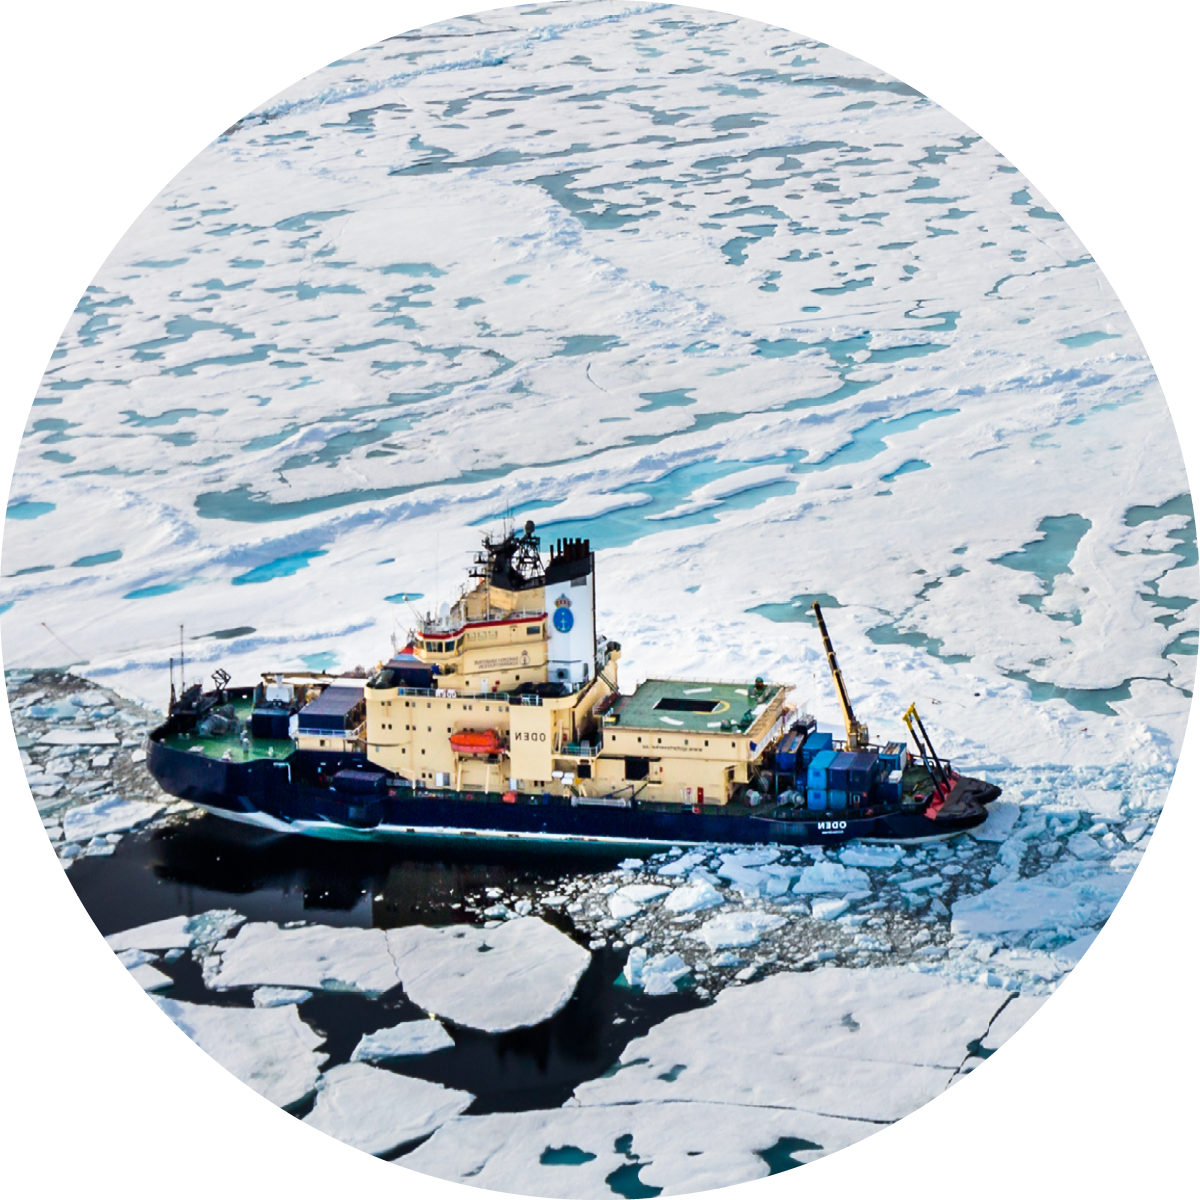 Large research vessel in the Arctic.